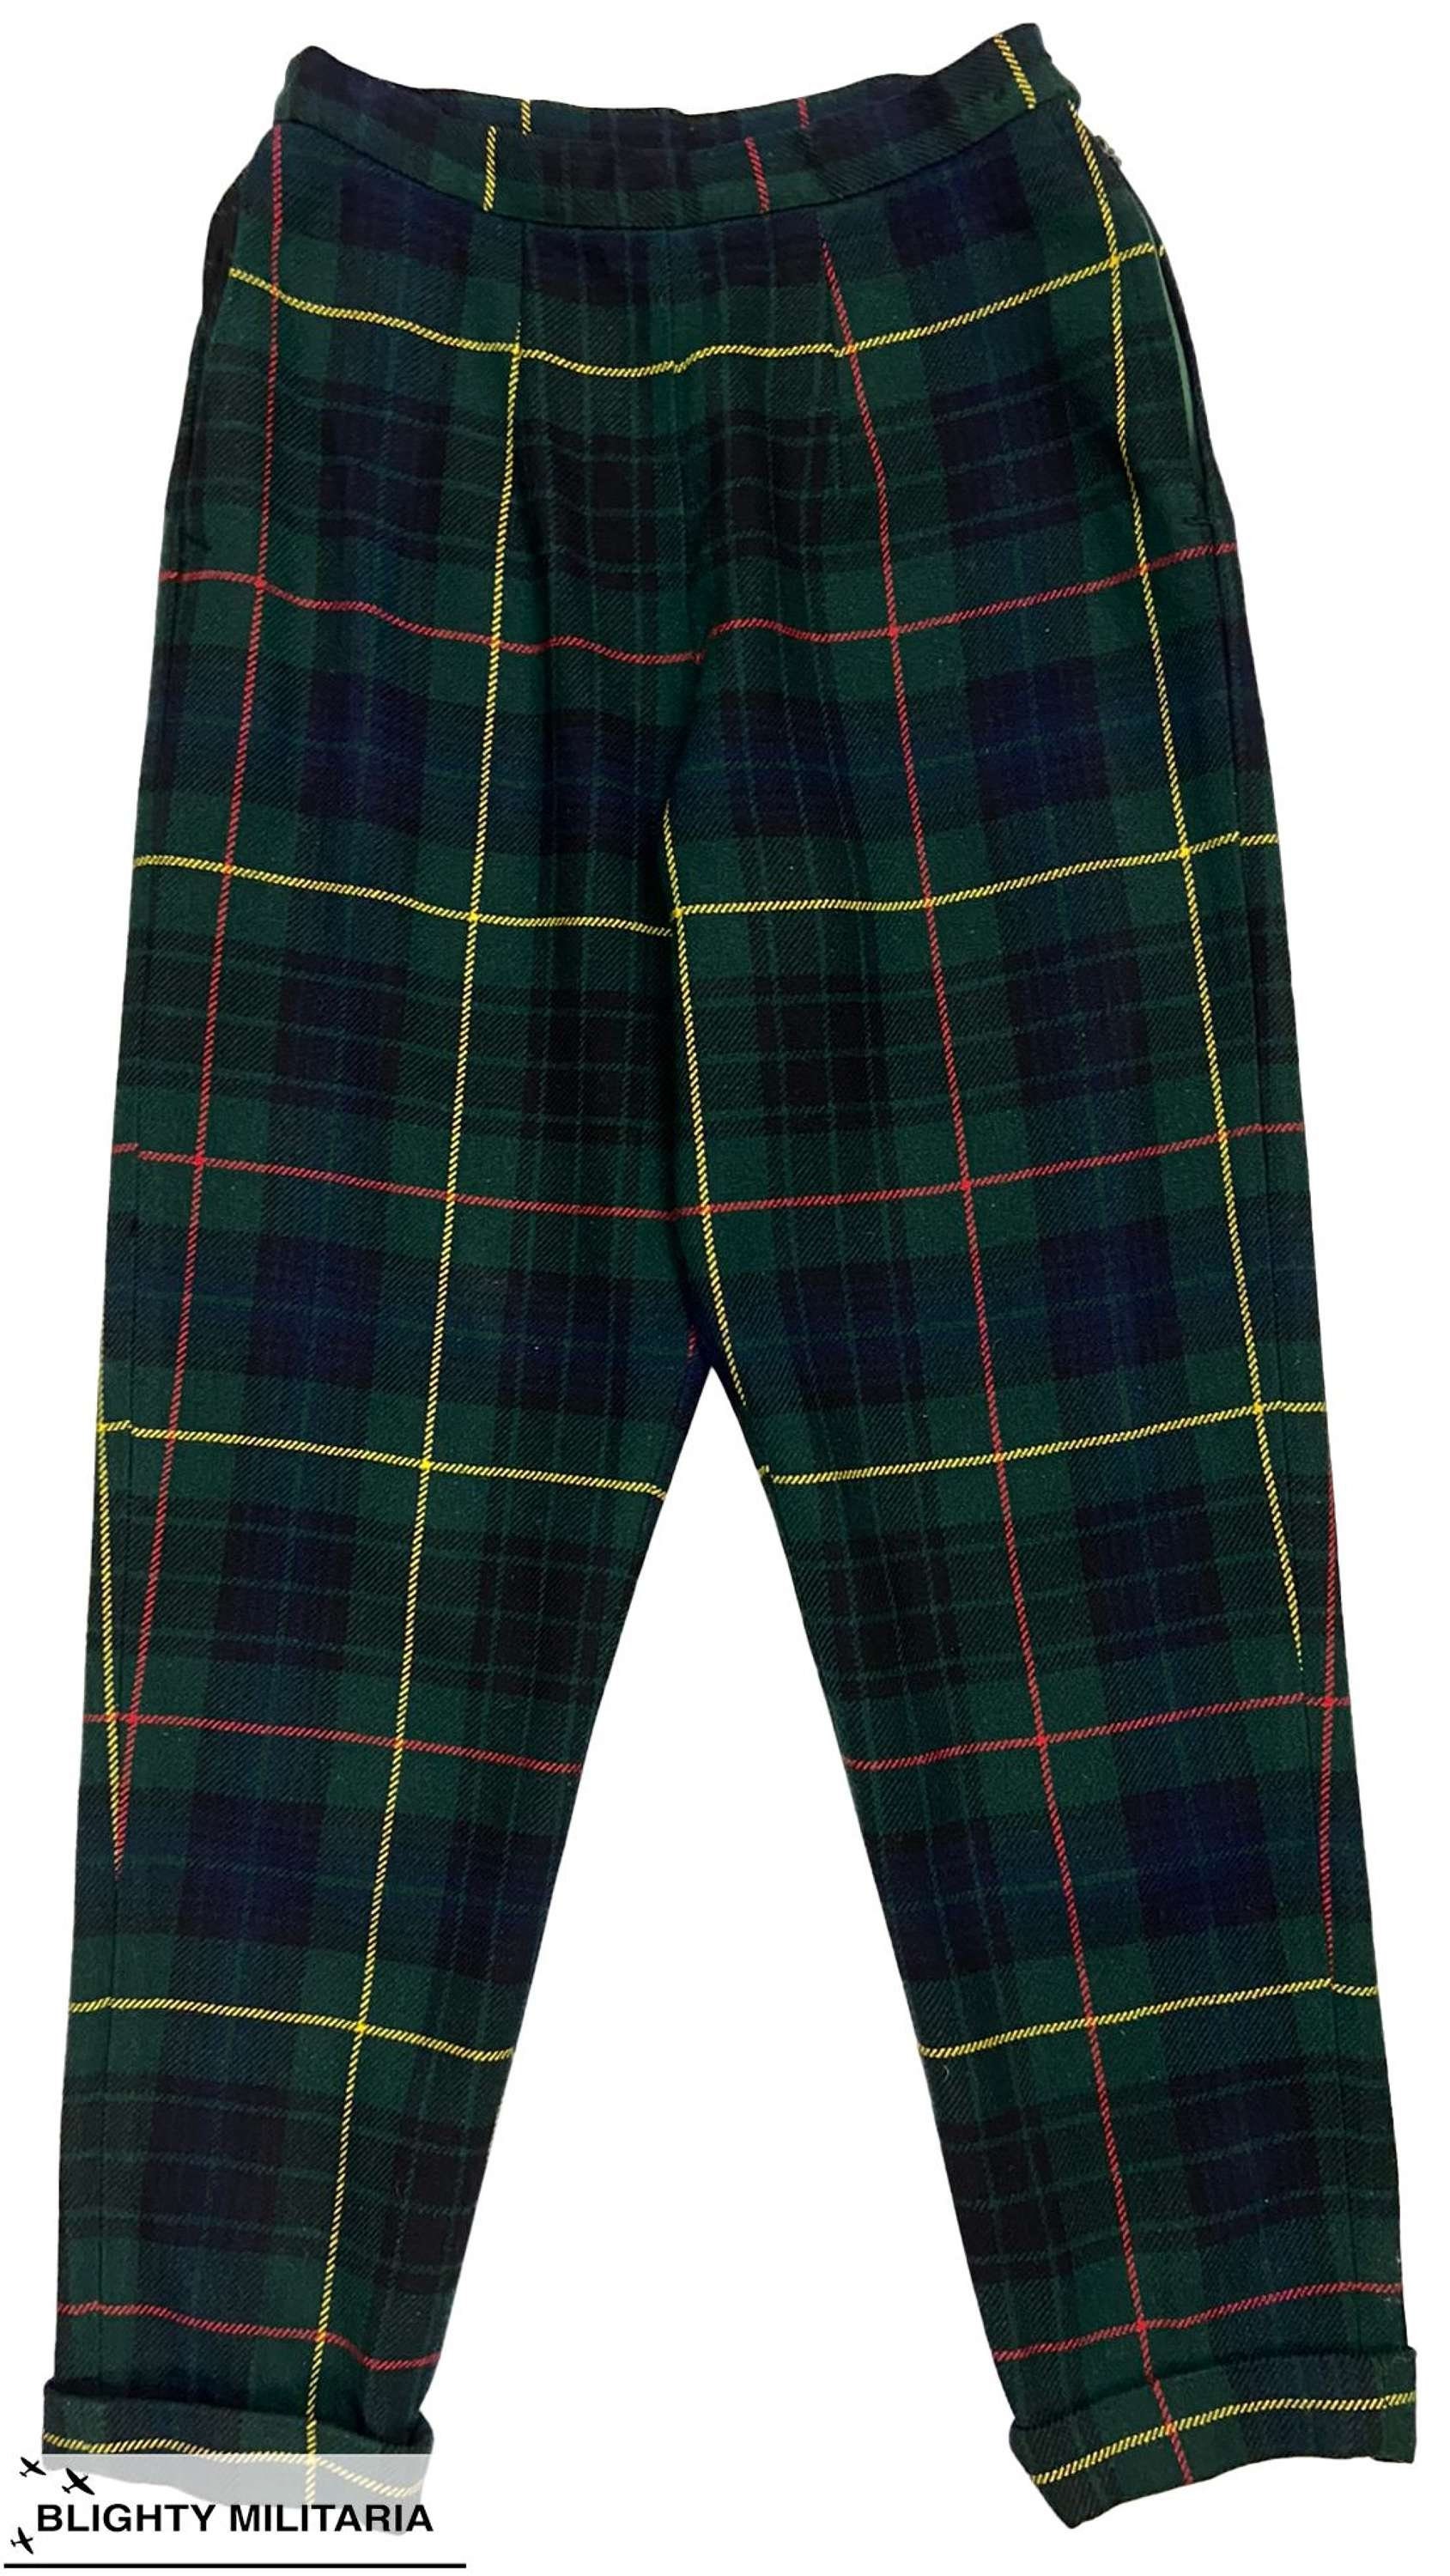 1950s Plaid Pants w/ Buckles Red Green Pedal Pushers Cigarette Pants 50s  Pockets